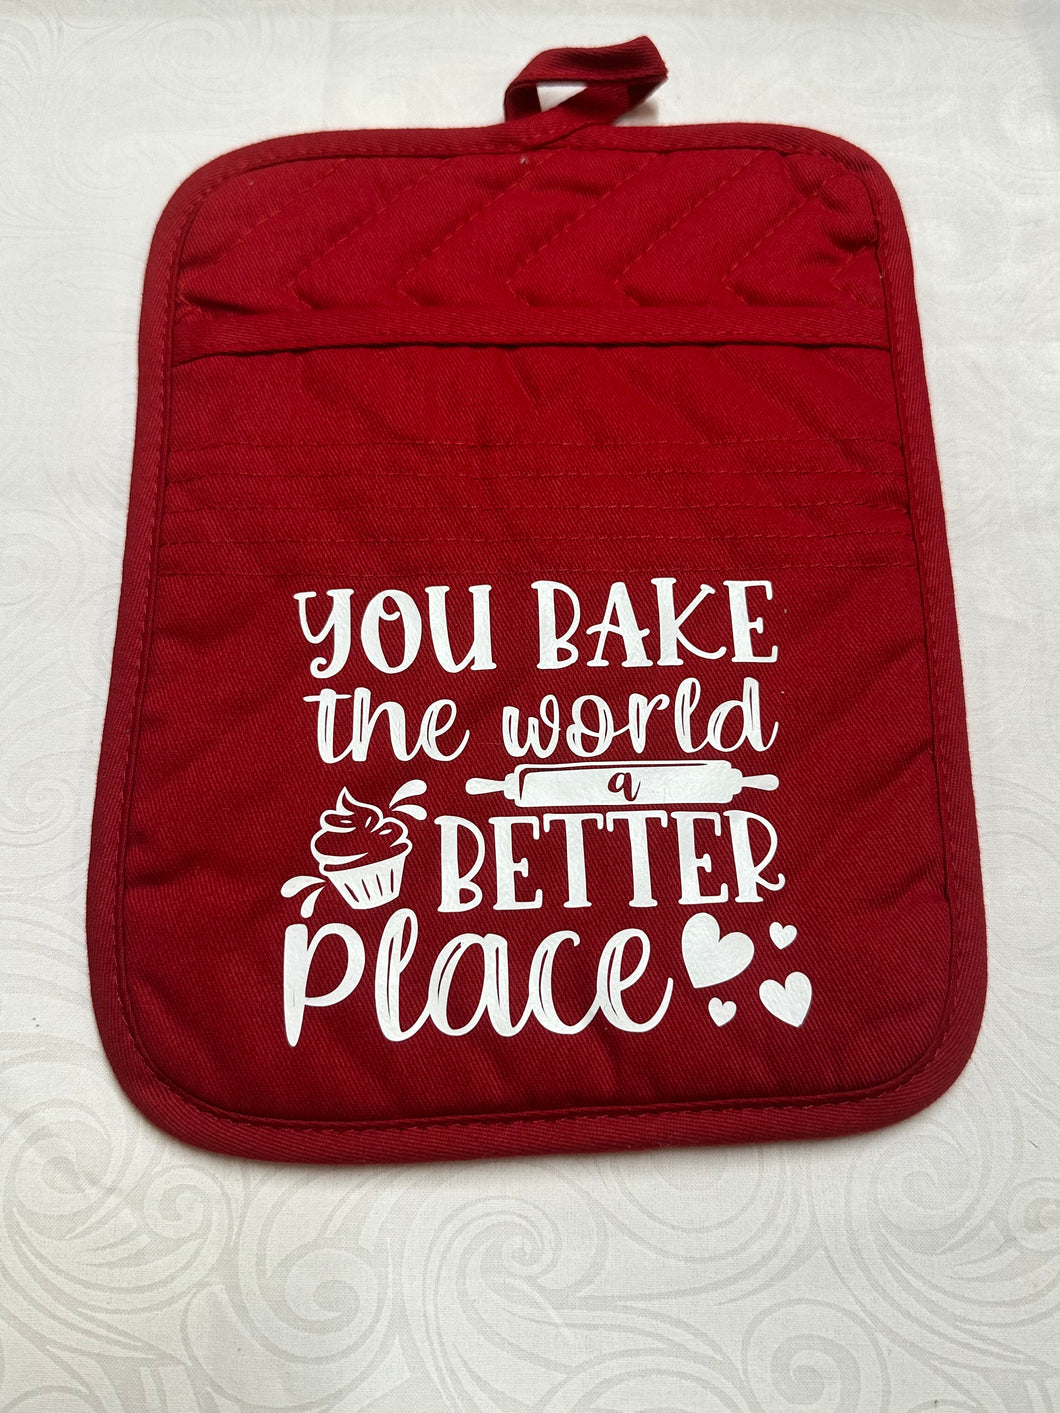 Instock - You bake the world a better place